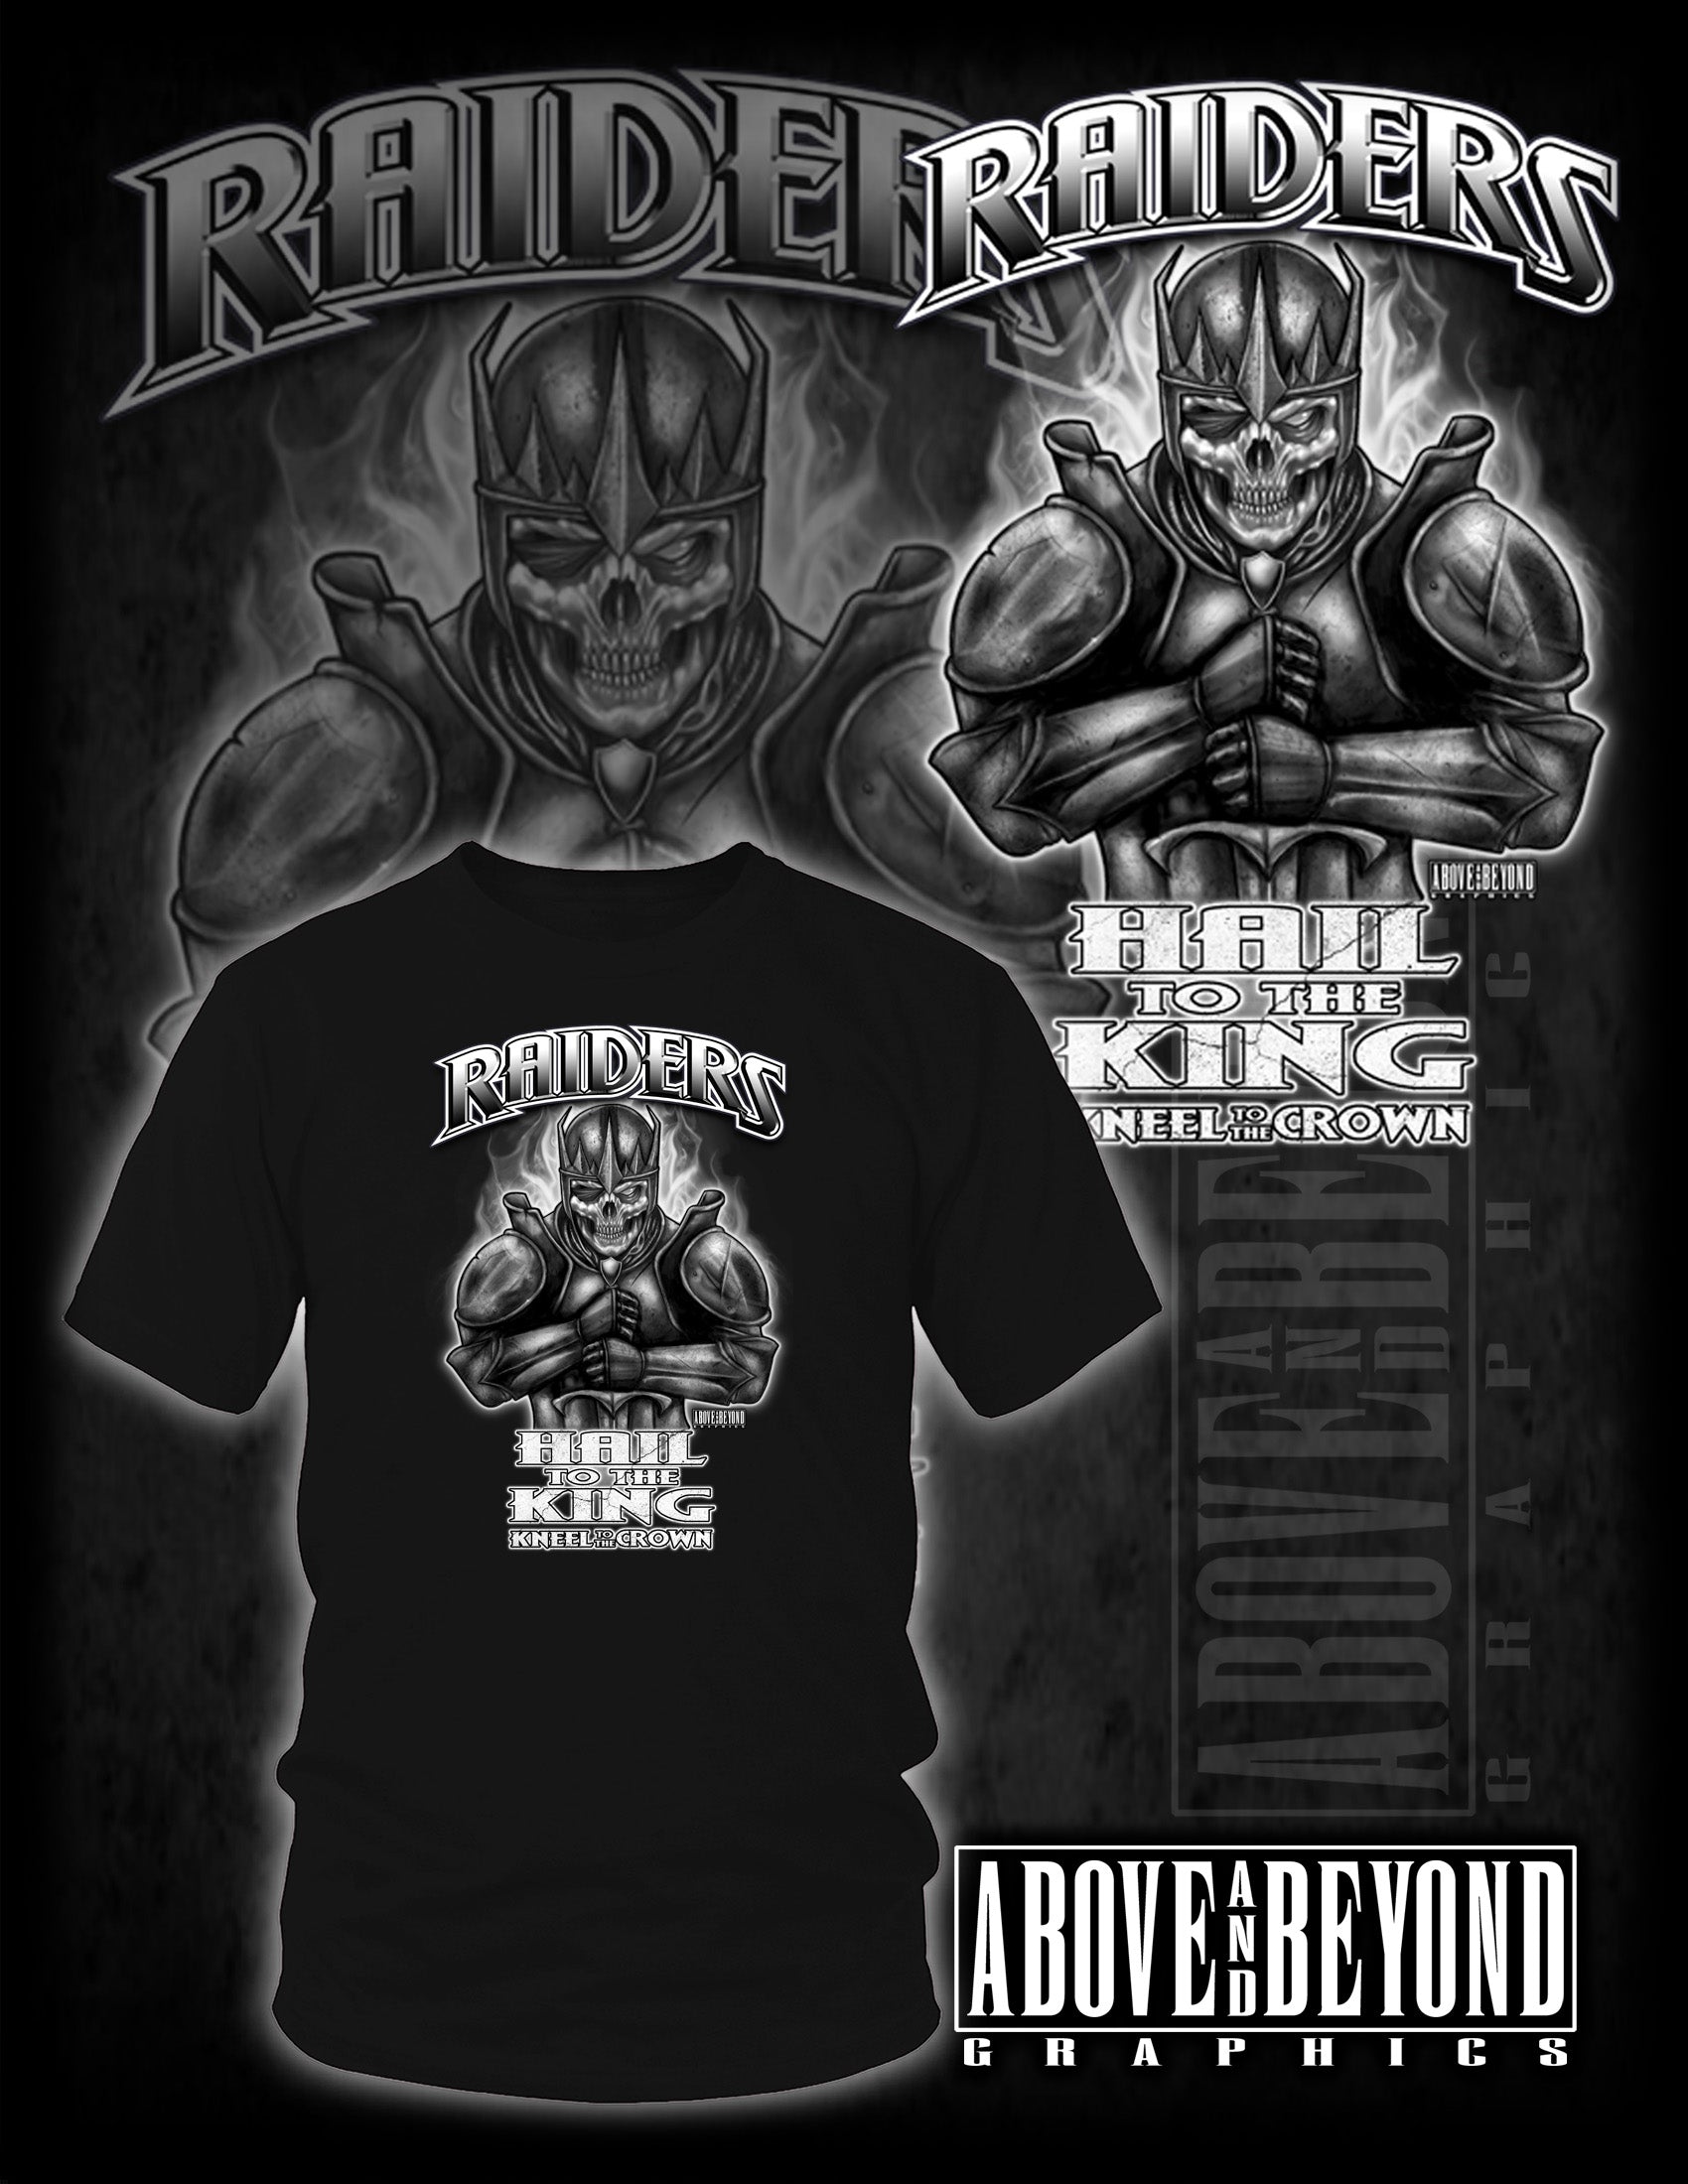 RAIDERS Hail to the King-Kneel to the Crown. Armored Skeleton